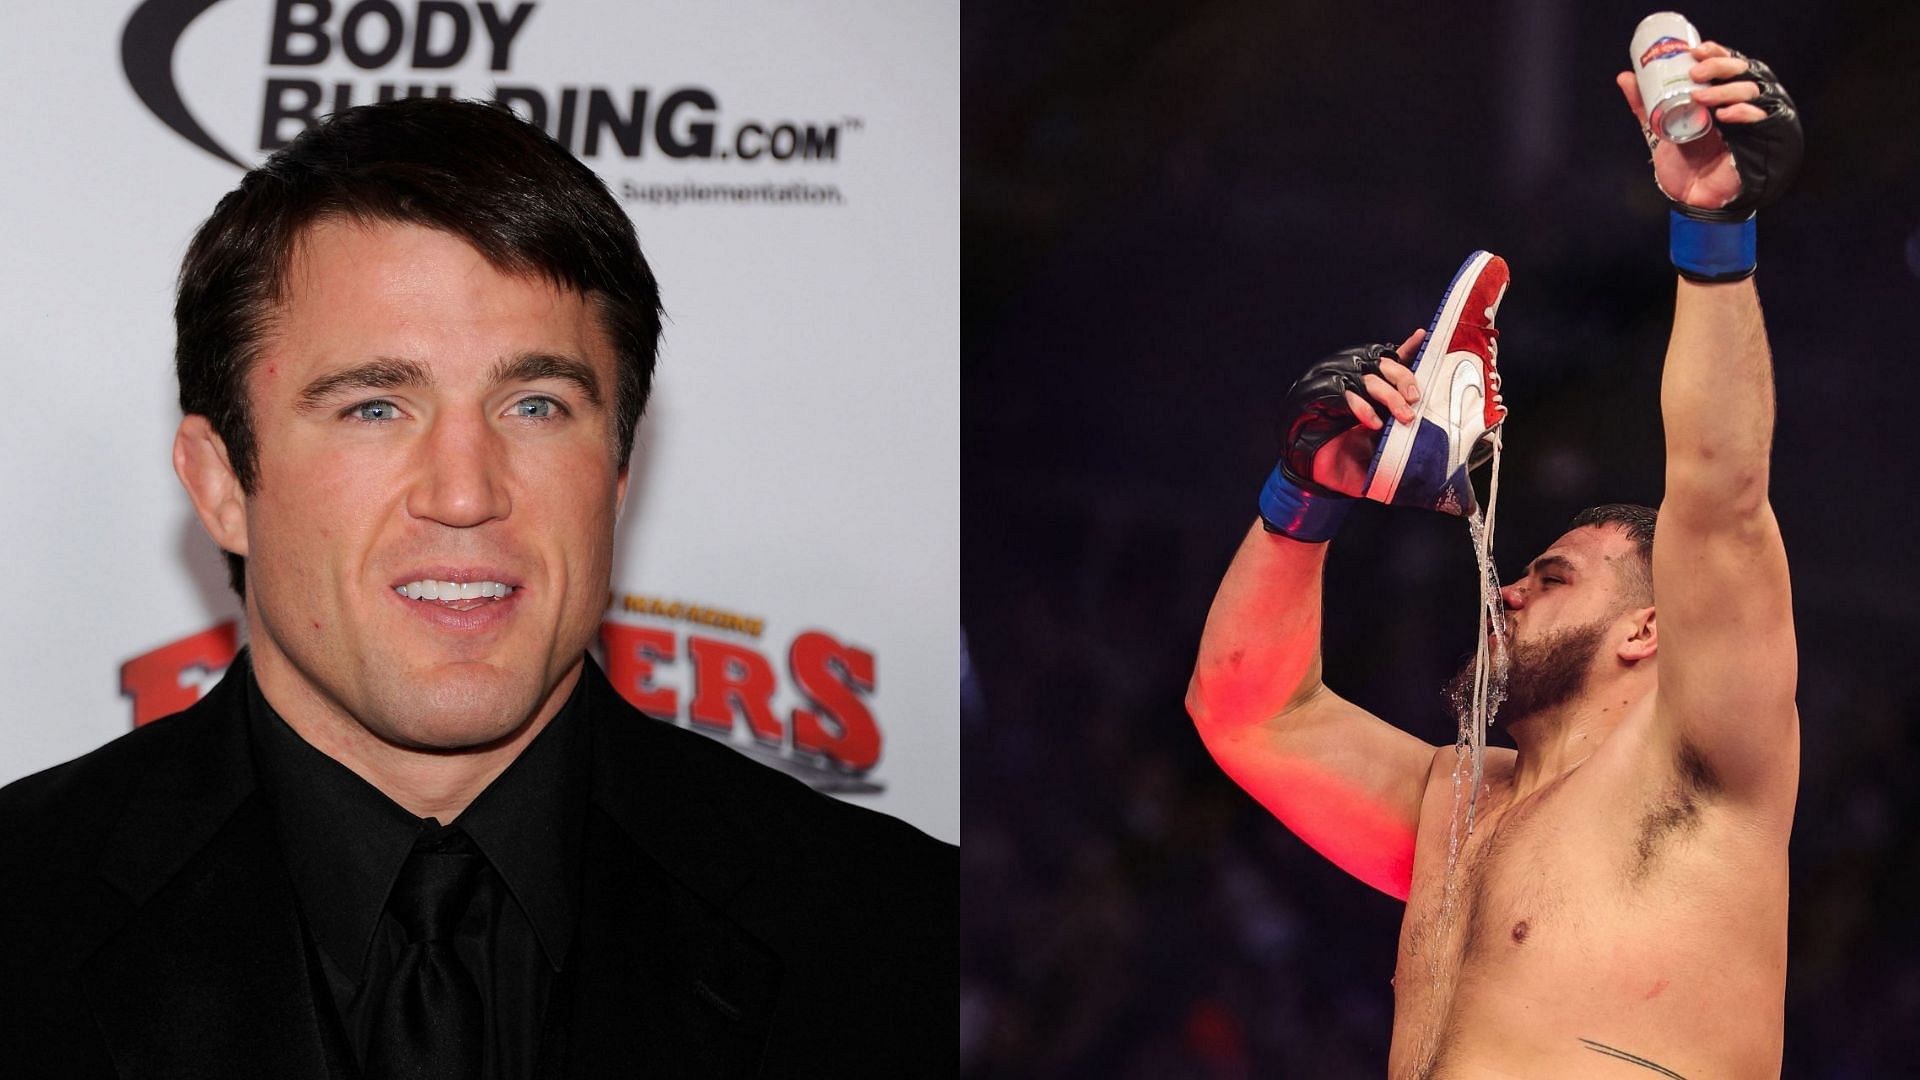 Chael Sonnen (left) and Tai Tuivasa (right) [Images courtesy of Getty]